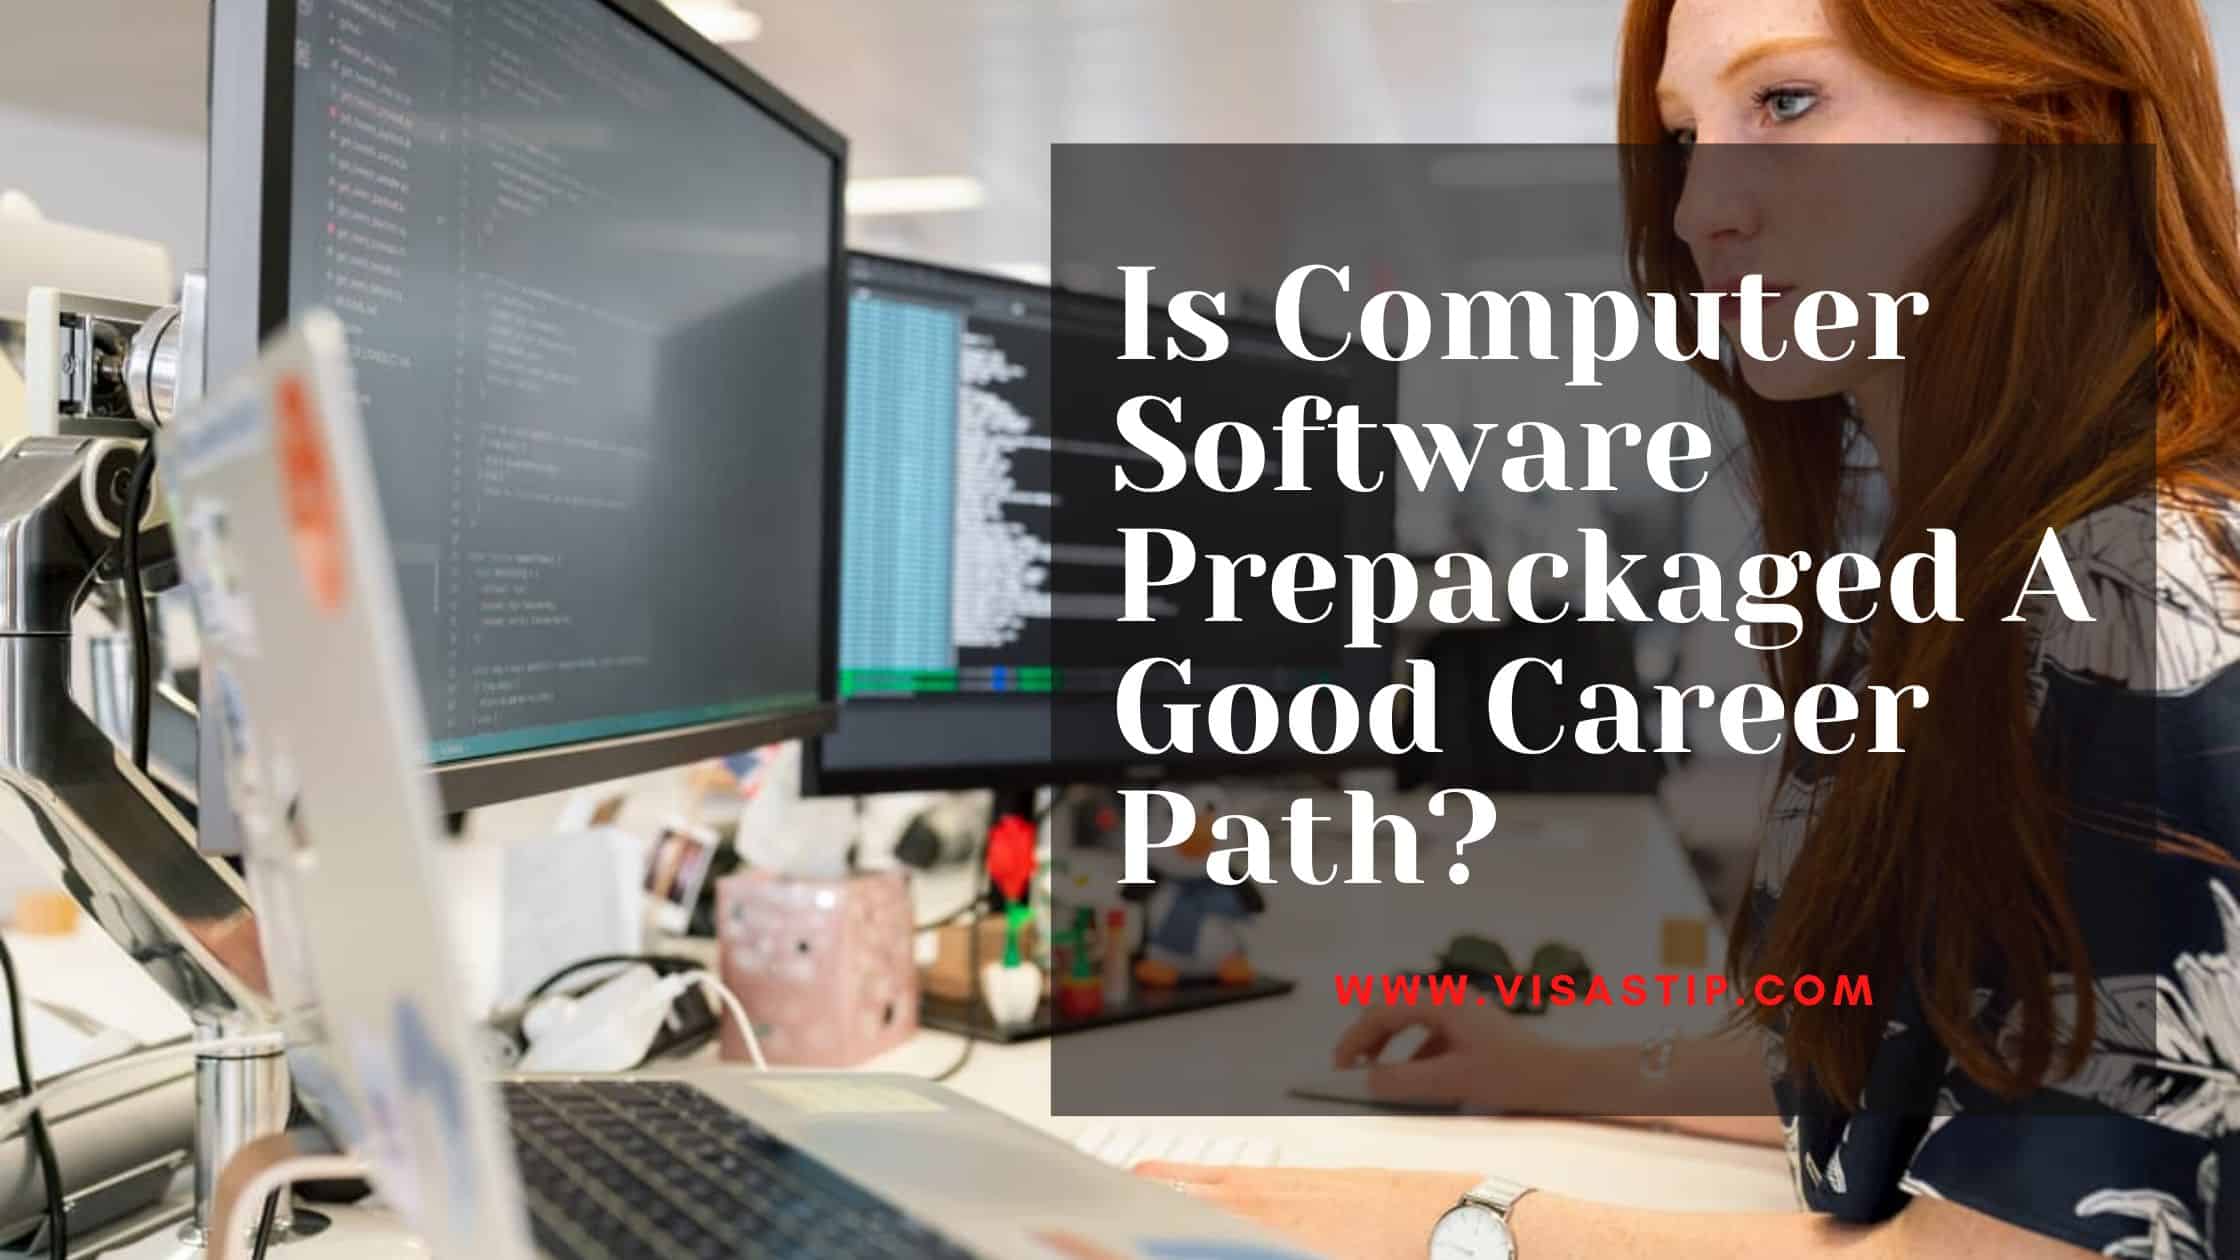 Is Computer Software Prepackaged A Good Career Path